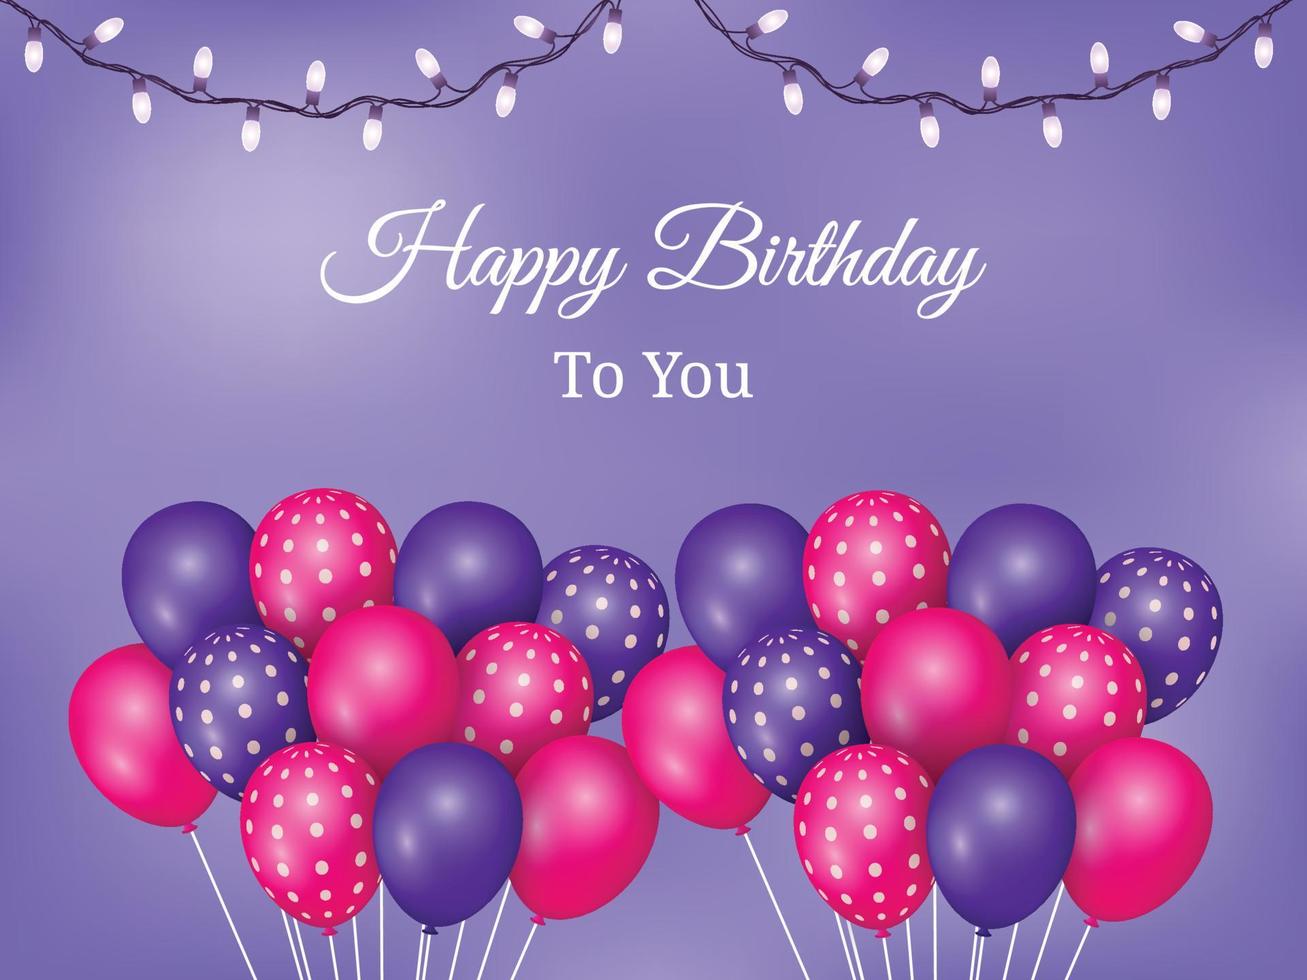 Happy birthday background decorated with pink and purple balloons vector illustration